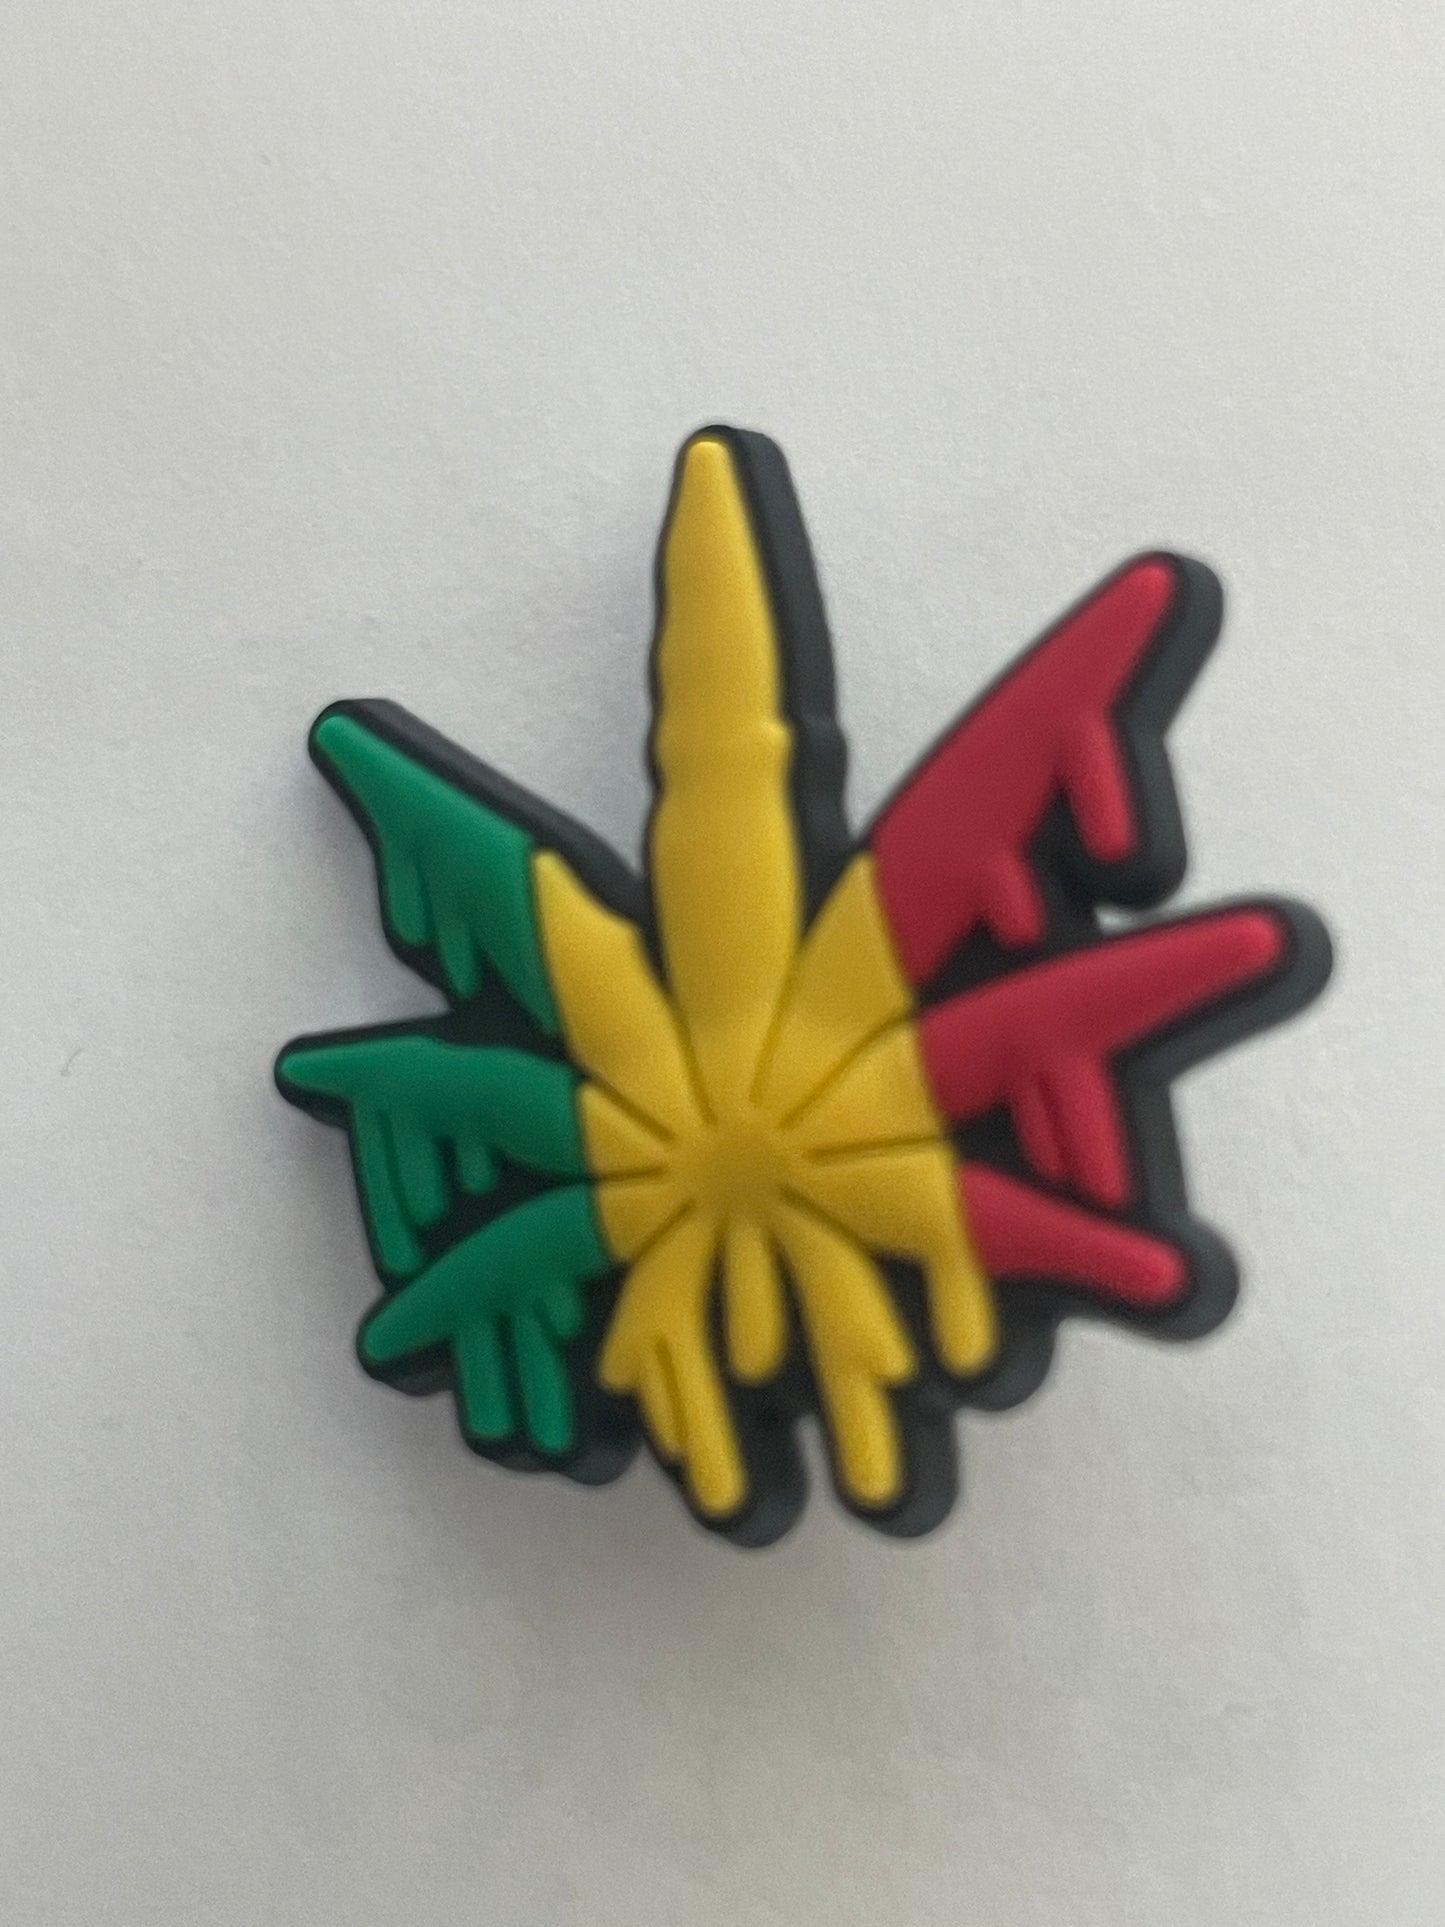 Green,yellow, red weed Shoe Charm